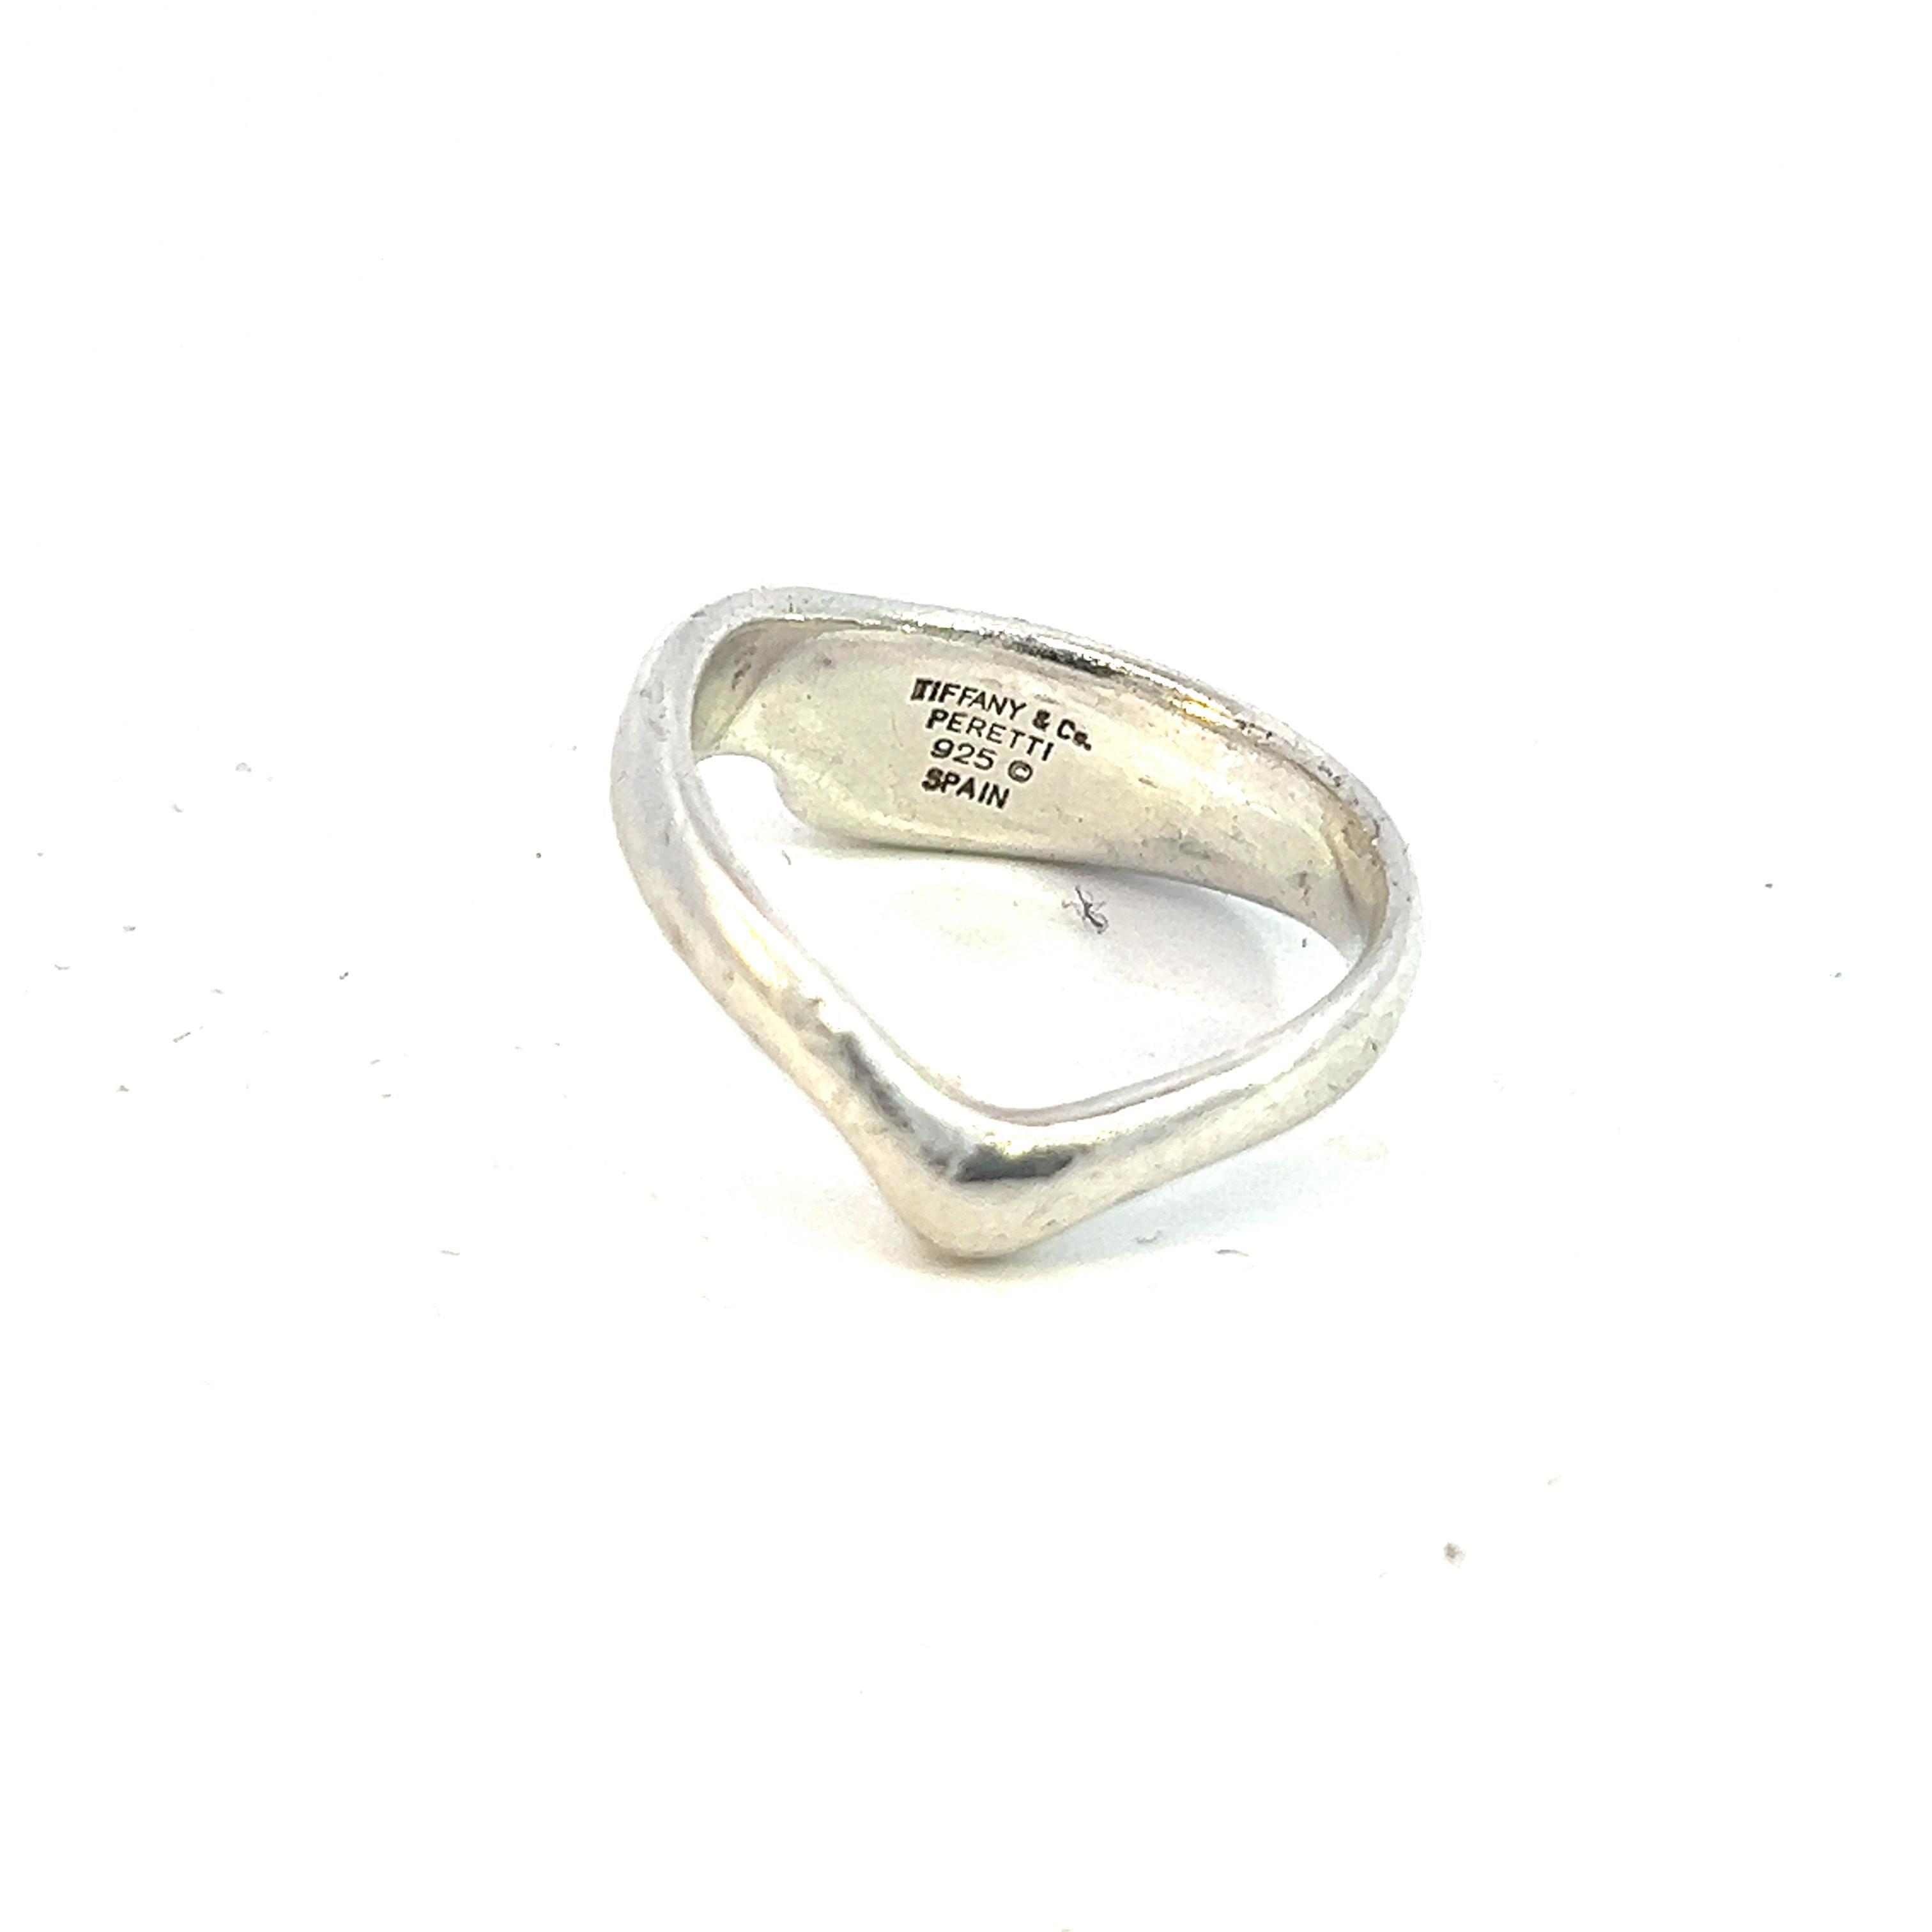 Authentic Tiffany & Co Estate Wave Ring By Elsa Peretti Size 6 Sterling SIlver TIF567

TRUSTED SELLER SINCE 2002

PLEASE SEE OUR HUNDREDS OF POSITIVE FEEDBACKS FROM OUR CLIENTS!!

FREE SHIPPING

DETAILS
Style: Wave
Designer: Elsa Peretti
Ring Size: